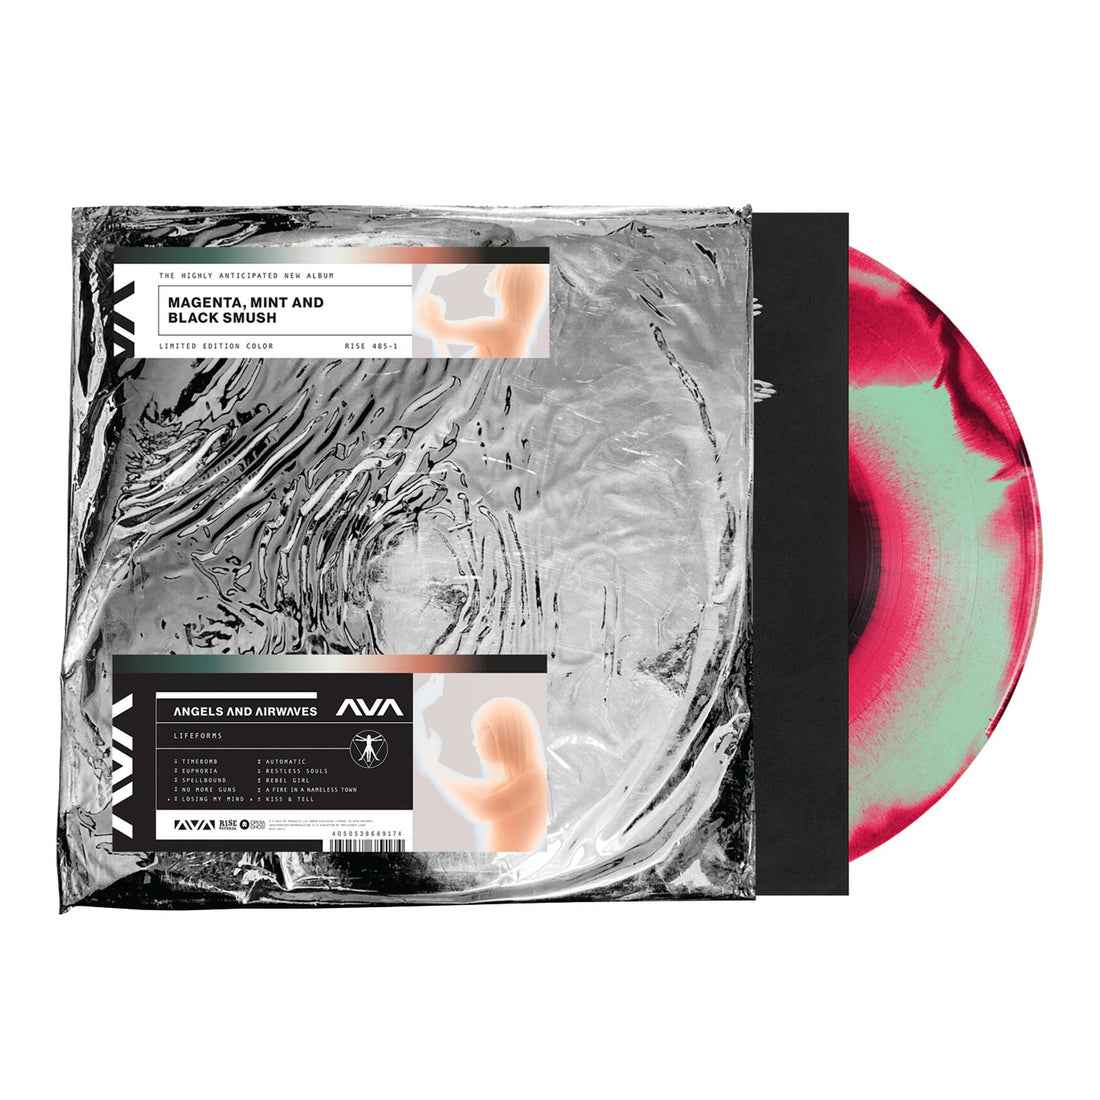 Angels and Airwaves Lifeforms Magenta, Mint and Black Smush LP